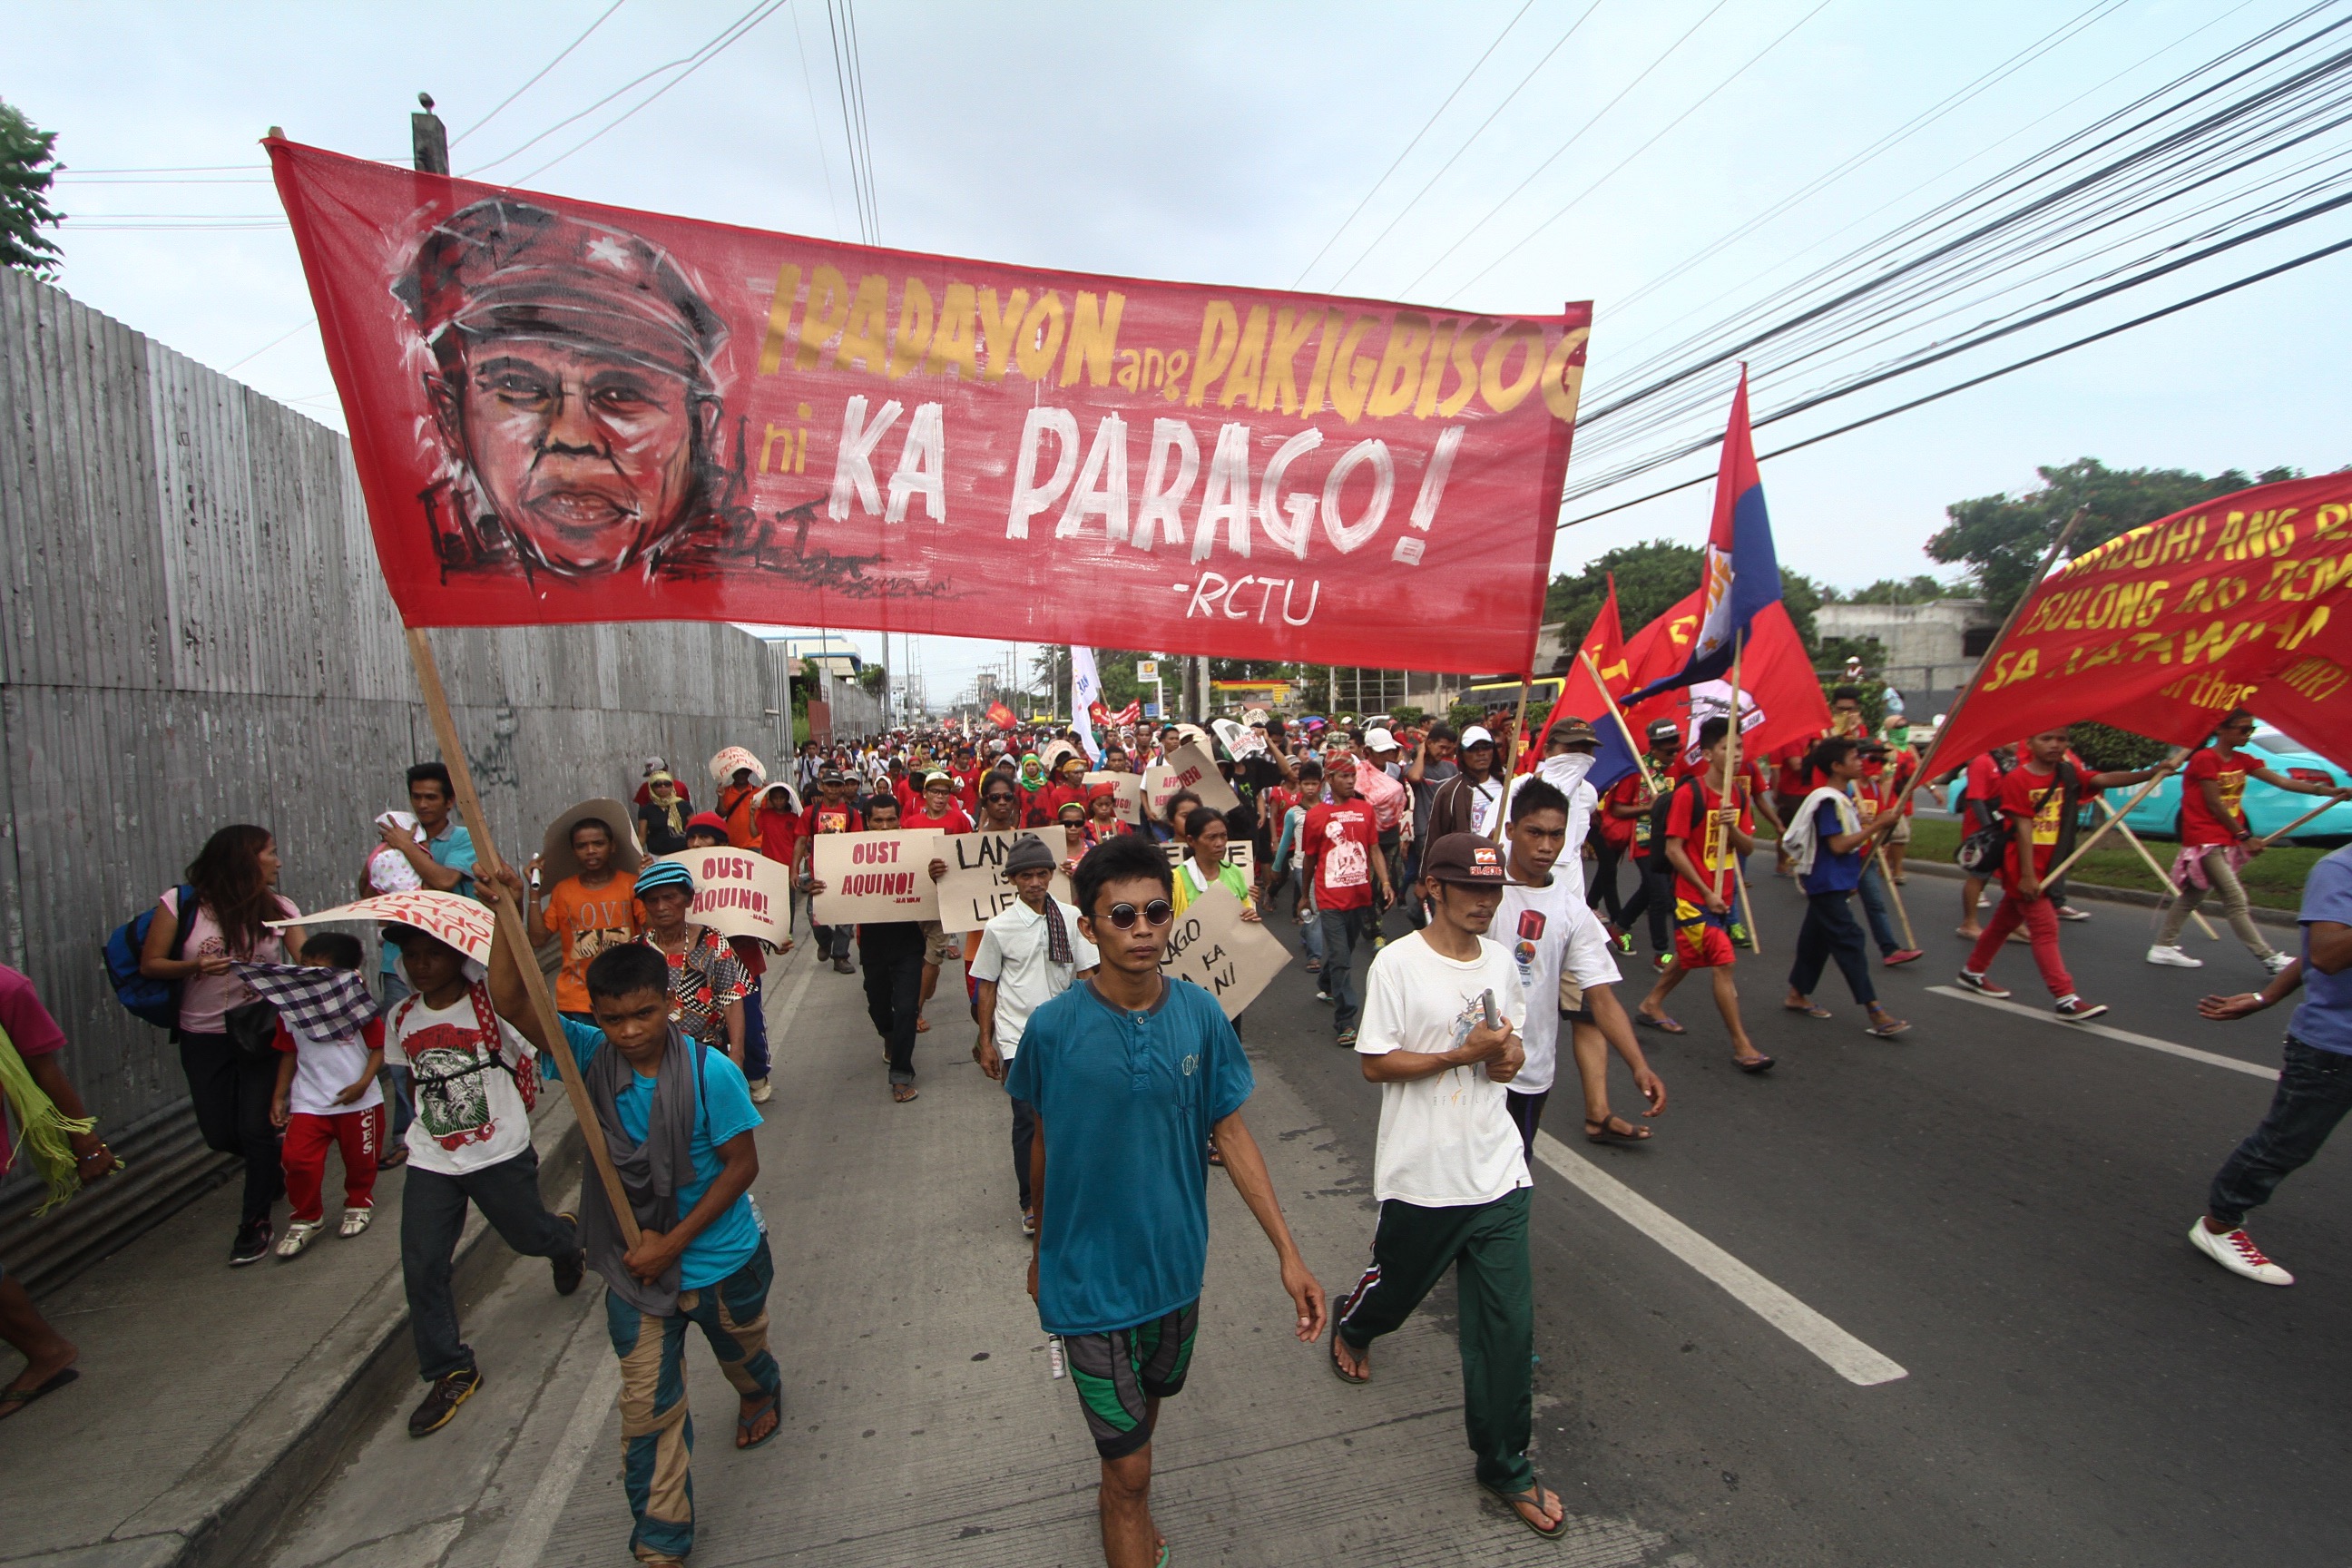  With guards standing in full attention, the body of slain New People's Army commander Leoncio "Parago" Pitao, which was enclosed in a plain white coffin adorned by the red hammer and sickle flag, was paraded around Davao City accompanied by at least 10,000 supporters.  PHOTO BY KARLOS MANLUPIG/INQUIRER MINDANAO